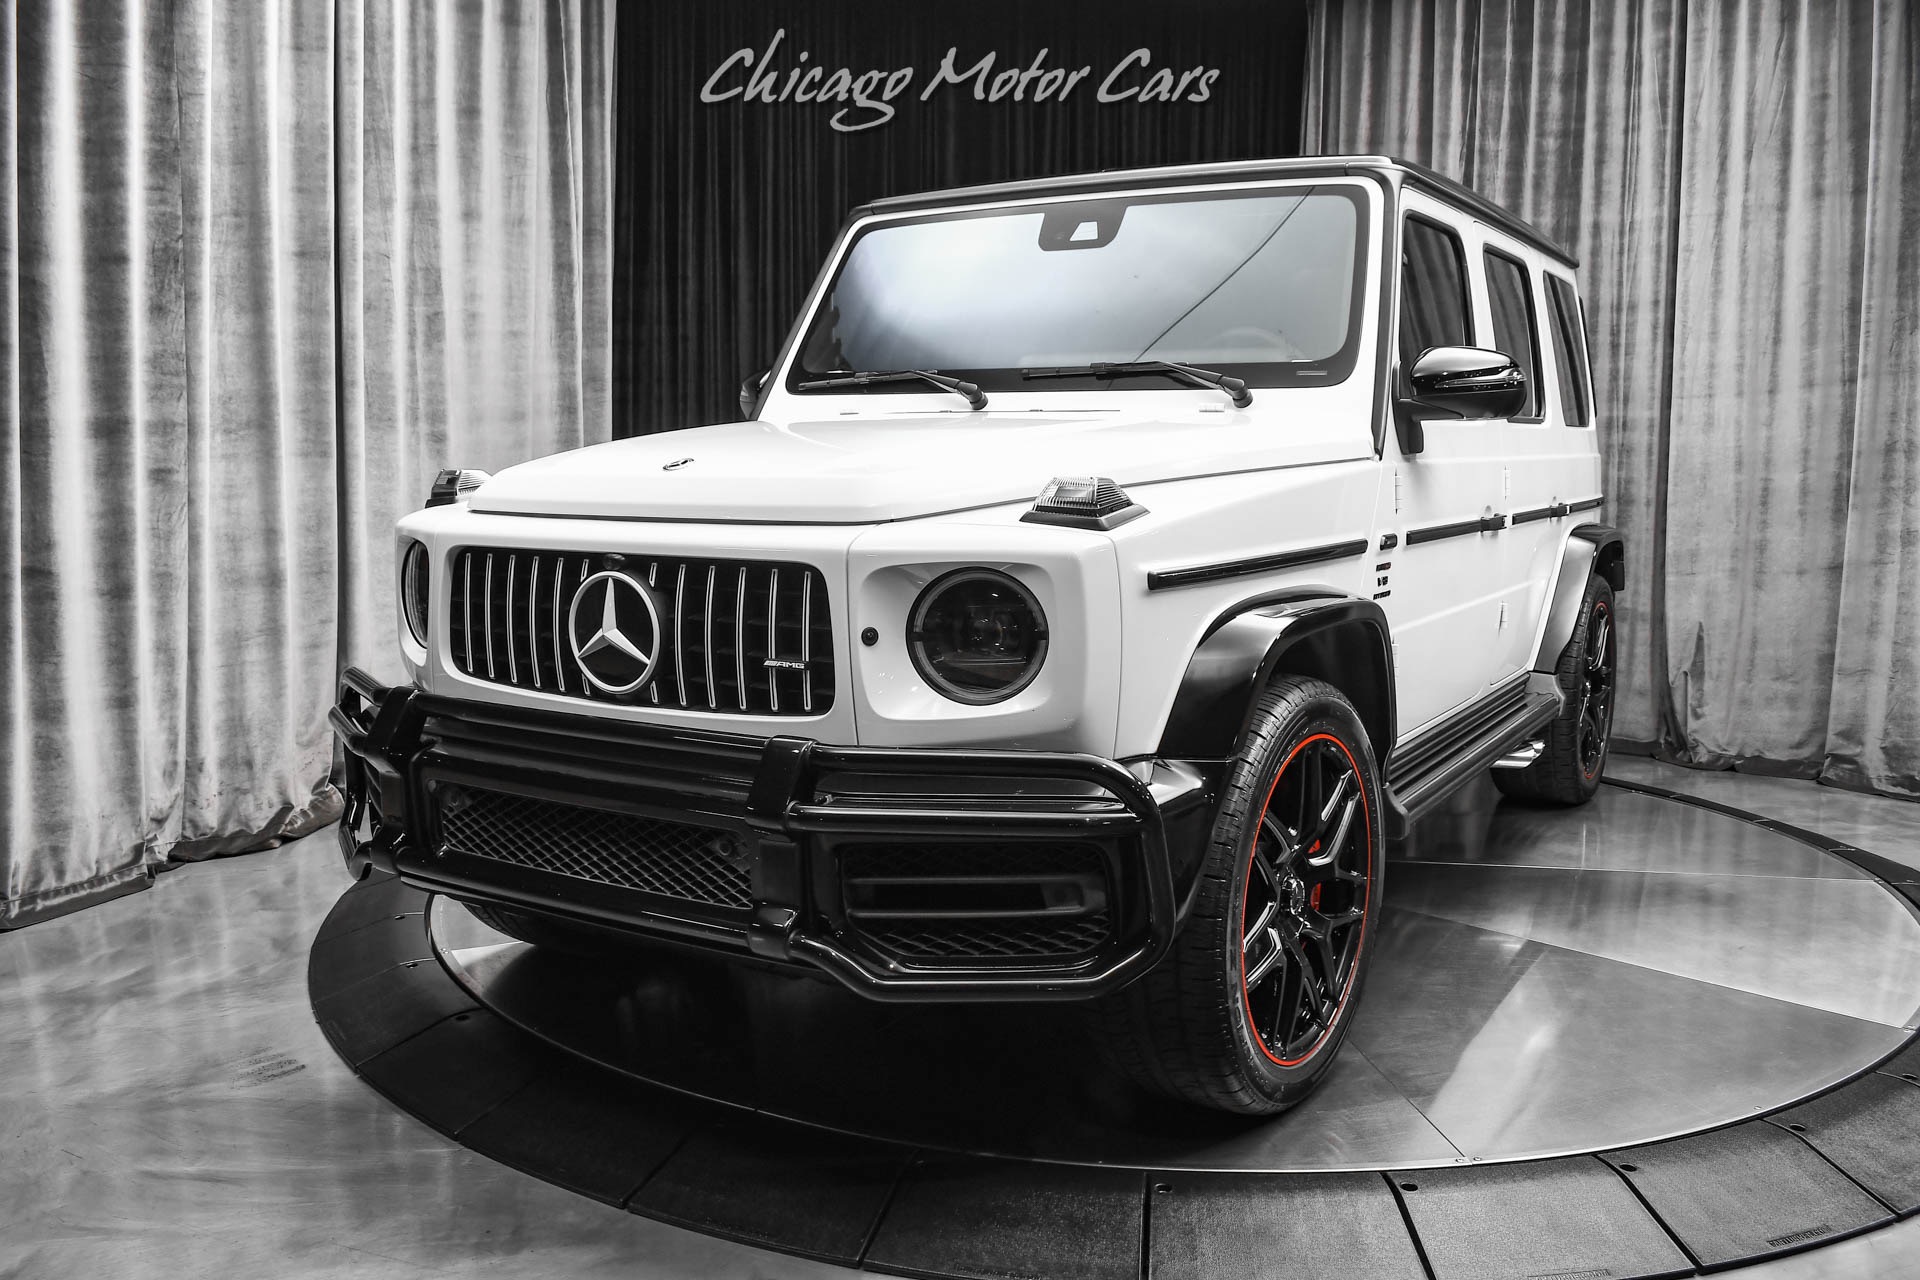 Used-2019-Mercedes-Benz-G63-AMG-4Matic-SUV-Renntech-Tune-Night-Package-Exclusive-Interior